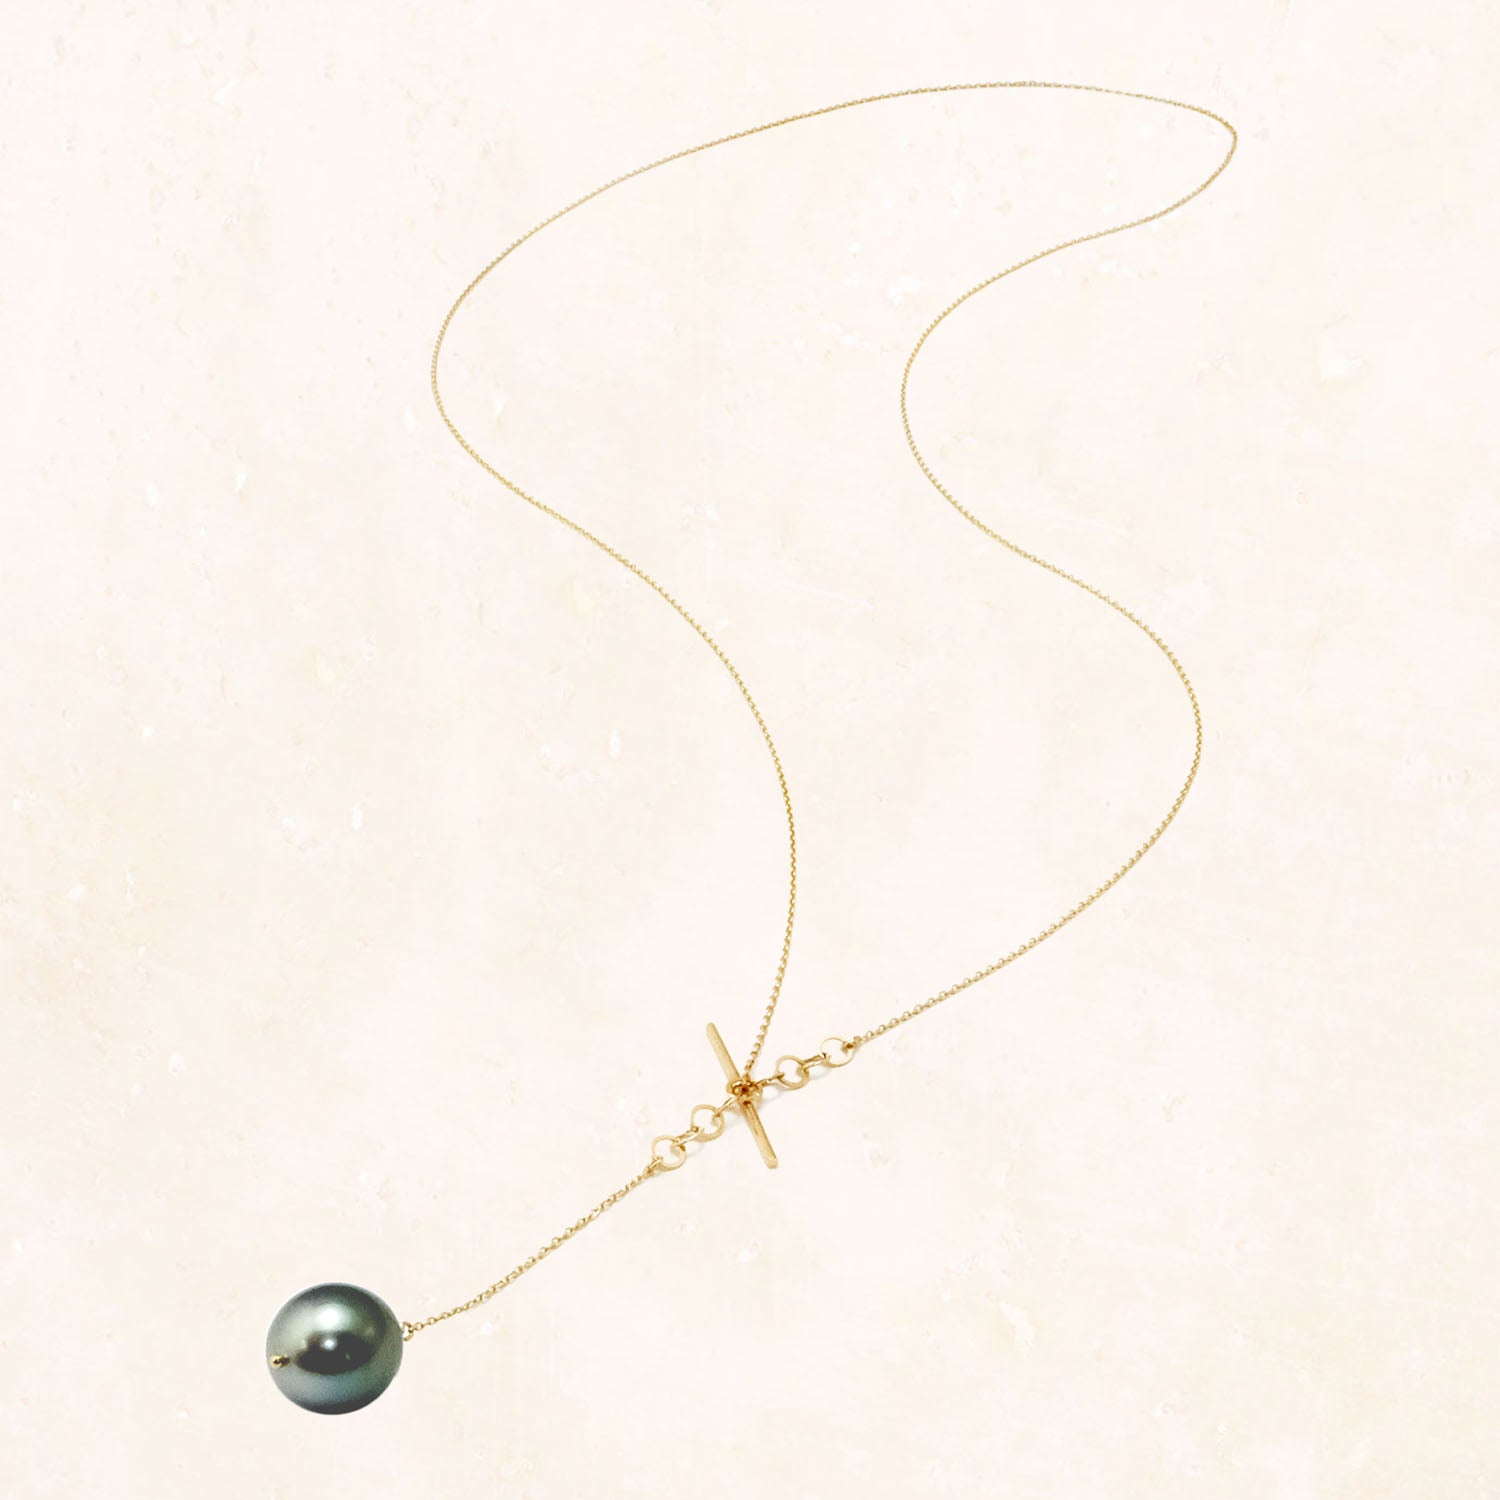 10K South Sea Pearl T-bar Necklace